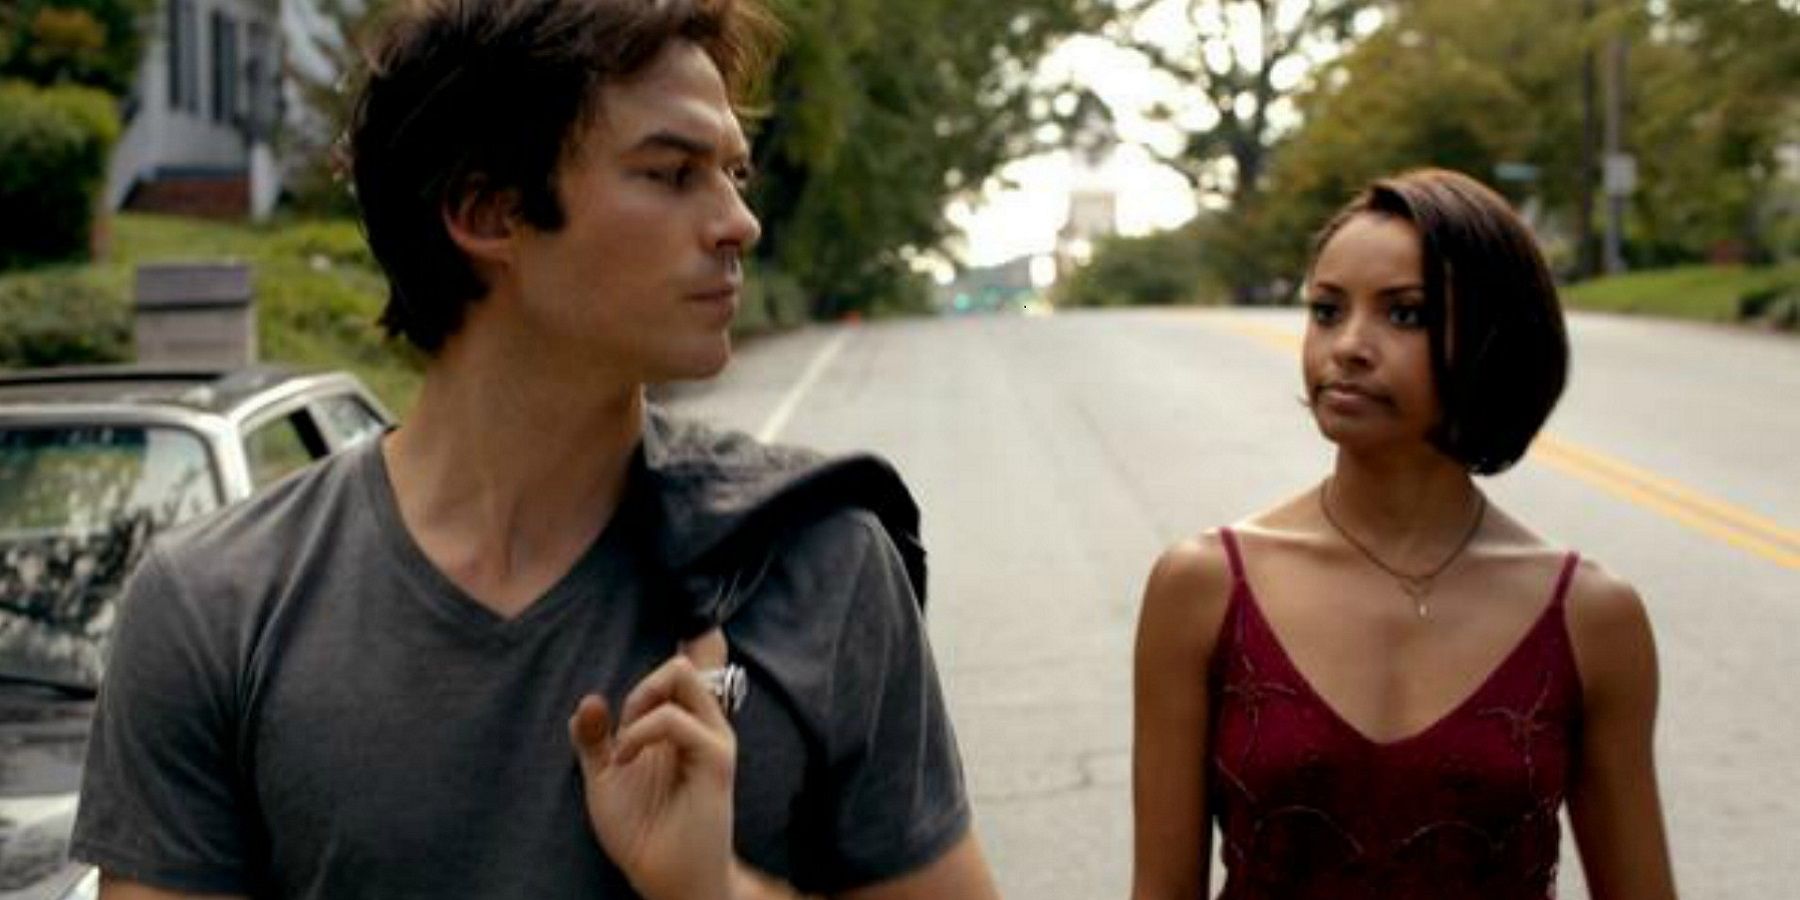 Bonnie and Damon in walking down the street in Vampire Diaries.